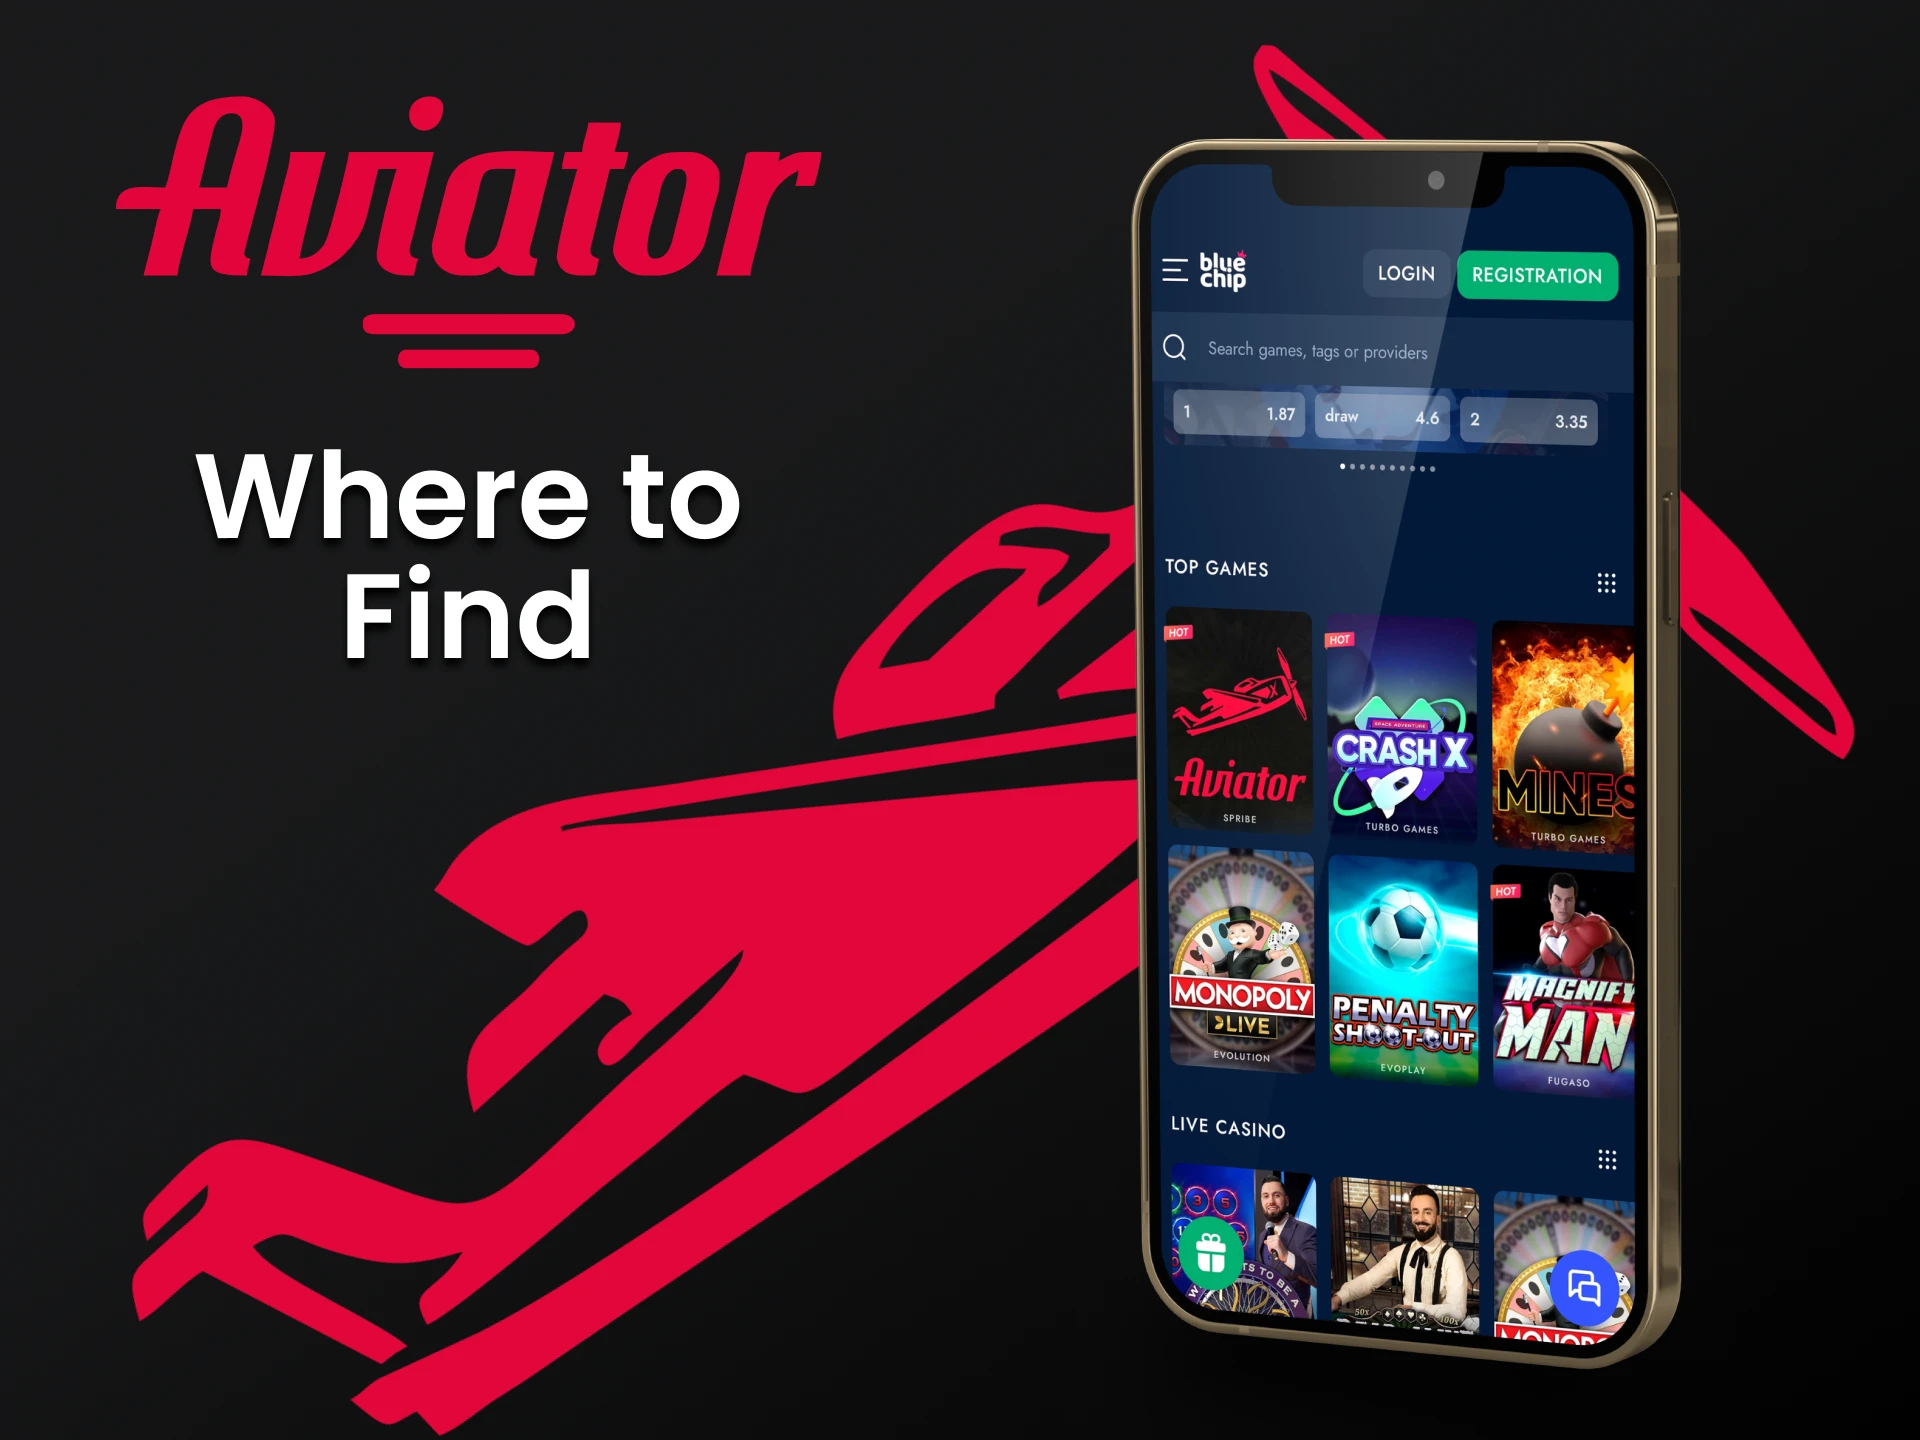 To get started in Aviator you need to complete a few steps.